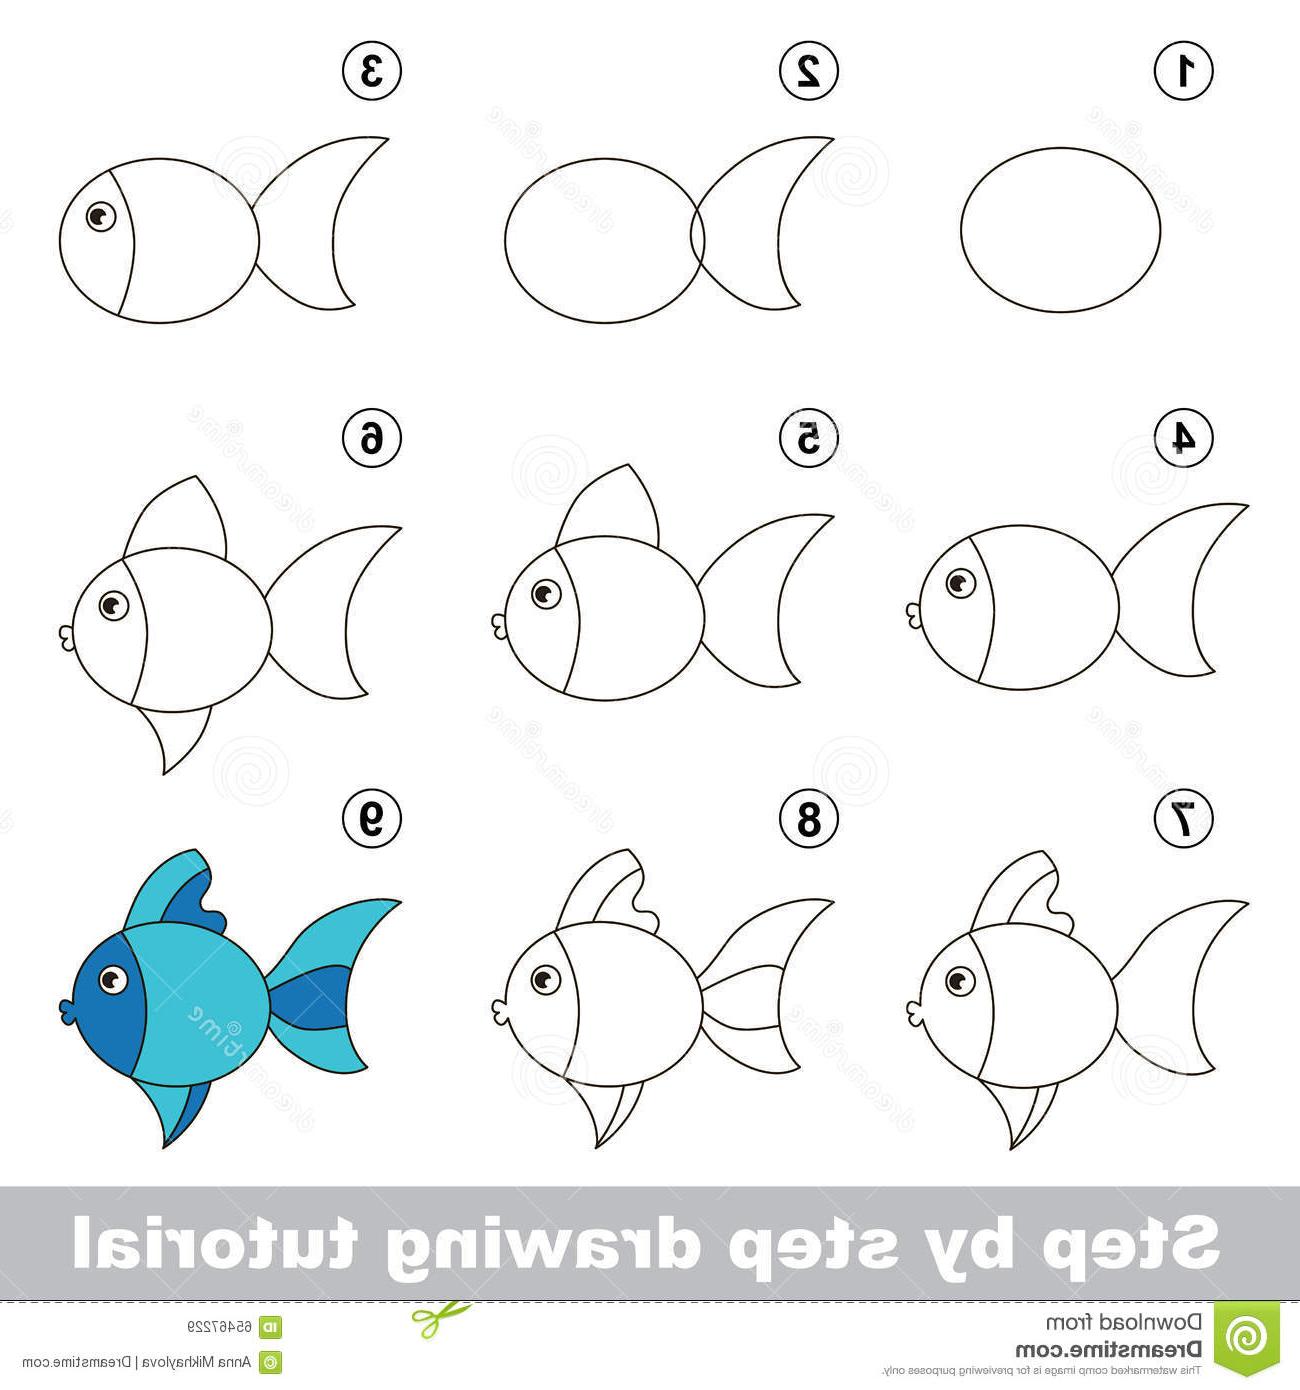 How To Draw Fish For Kids Step By Step In this step by step drawing